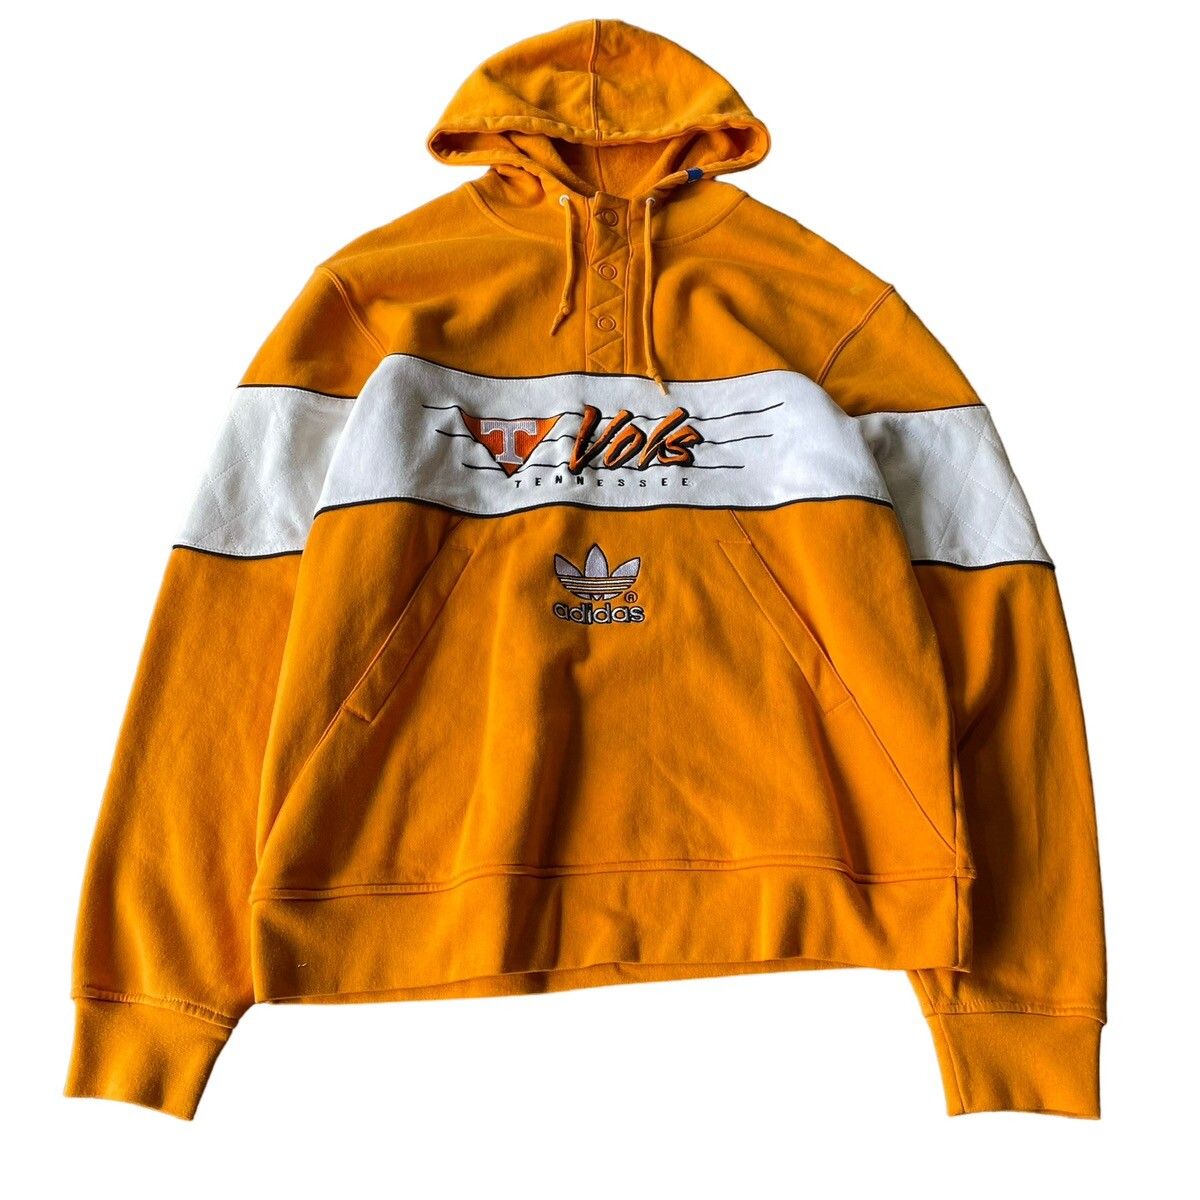 Adidas Vintage Tennessee Adidas Hoodie/ Streetwear/ Outdoor Style/ Size US XL / EU 56 / 4 - 1 Preview